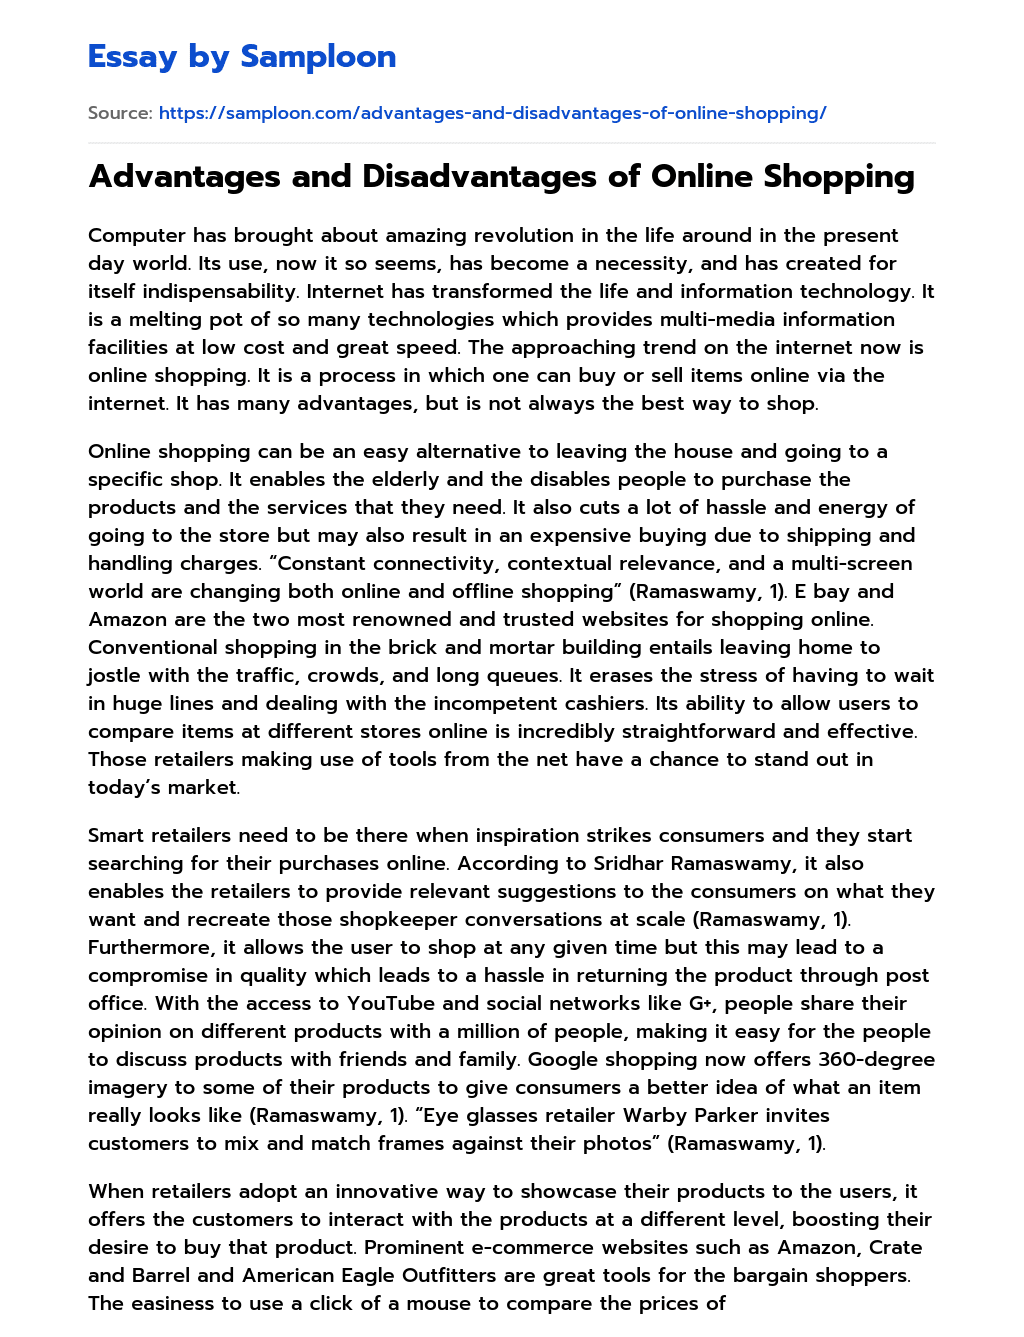 Advantages and Disadvantages of Online Shopping essay